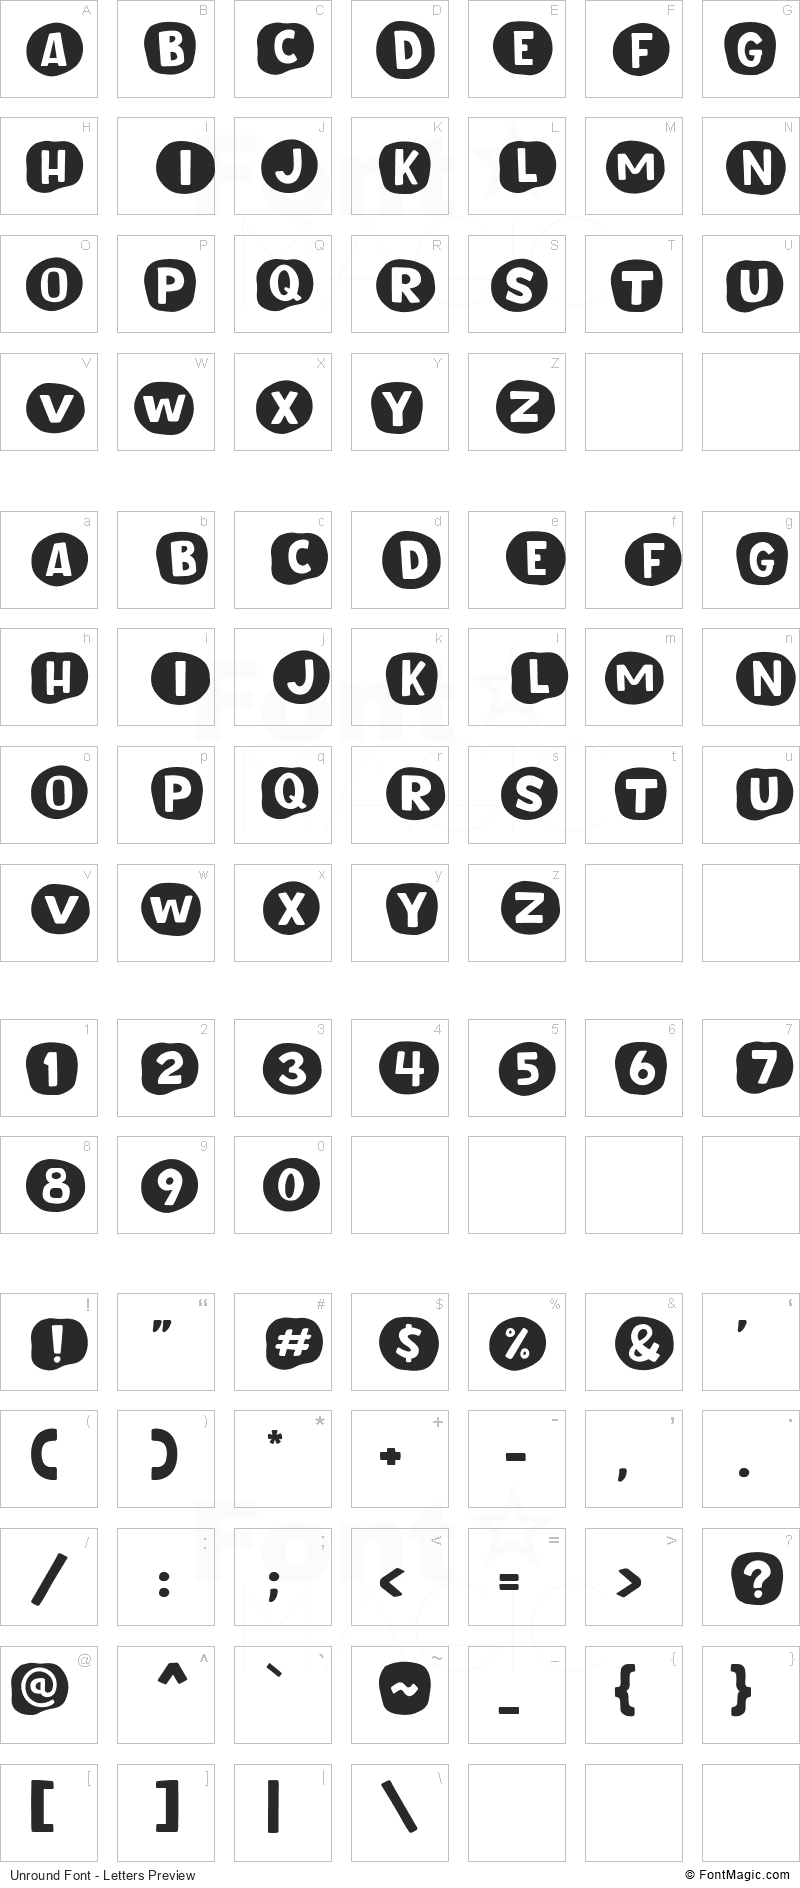 Unround Font - All Latters Preview Chart